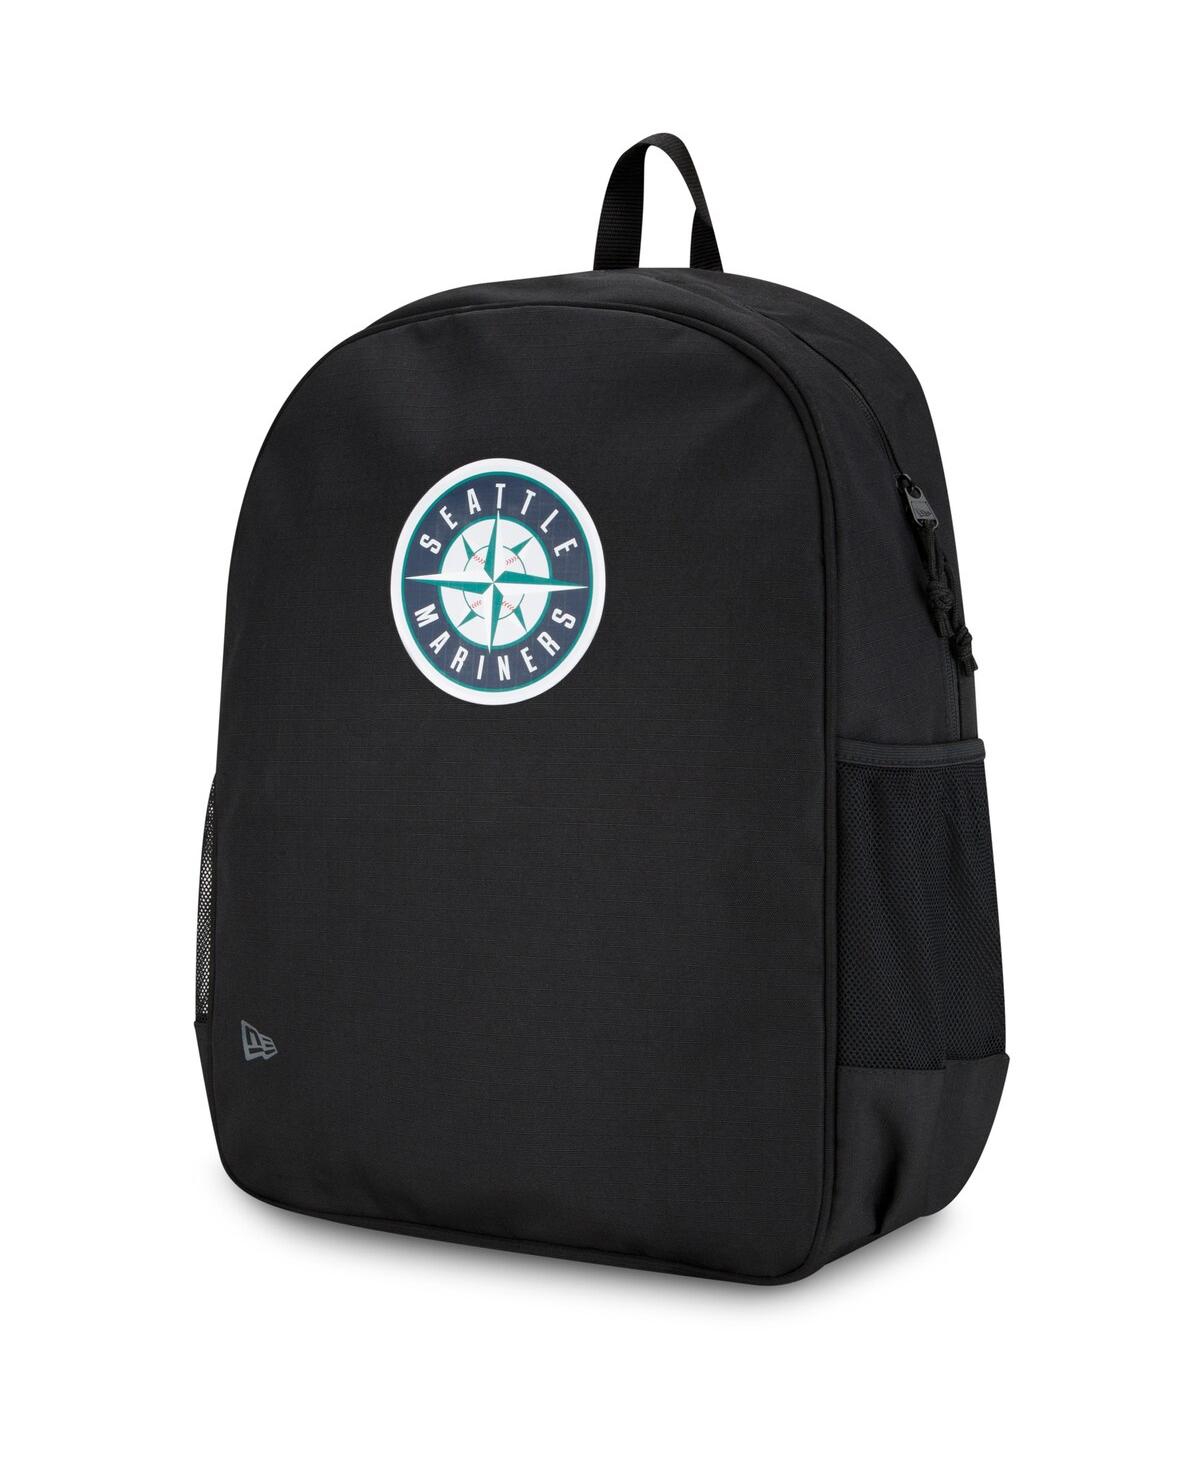 Men's and Women's New Era Seattle Mariners Trend Backpack - Black